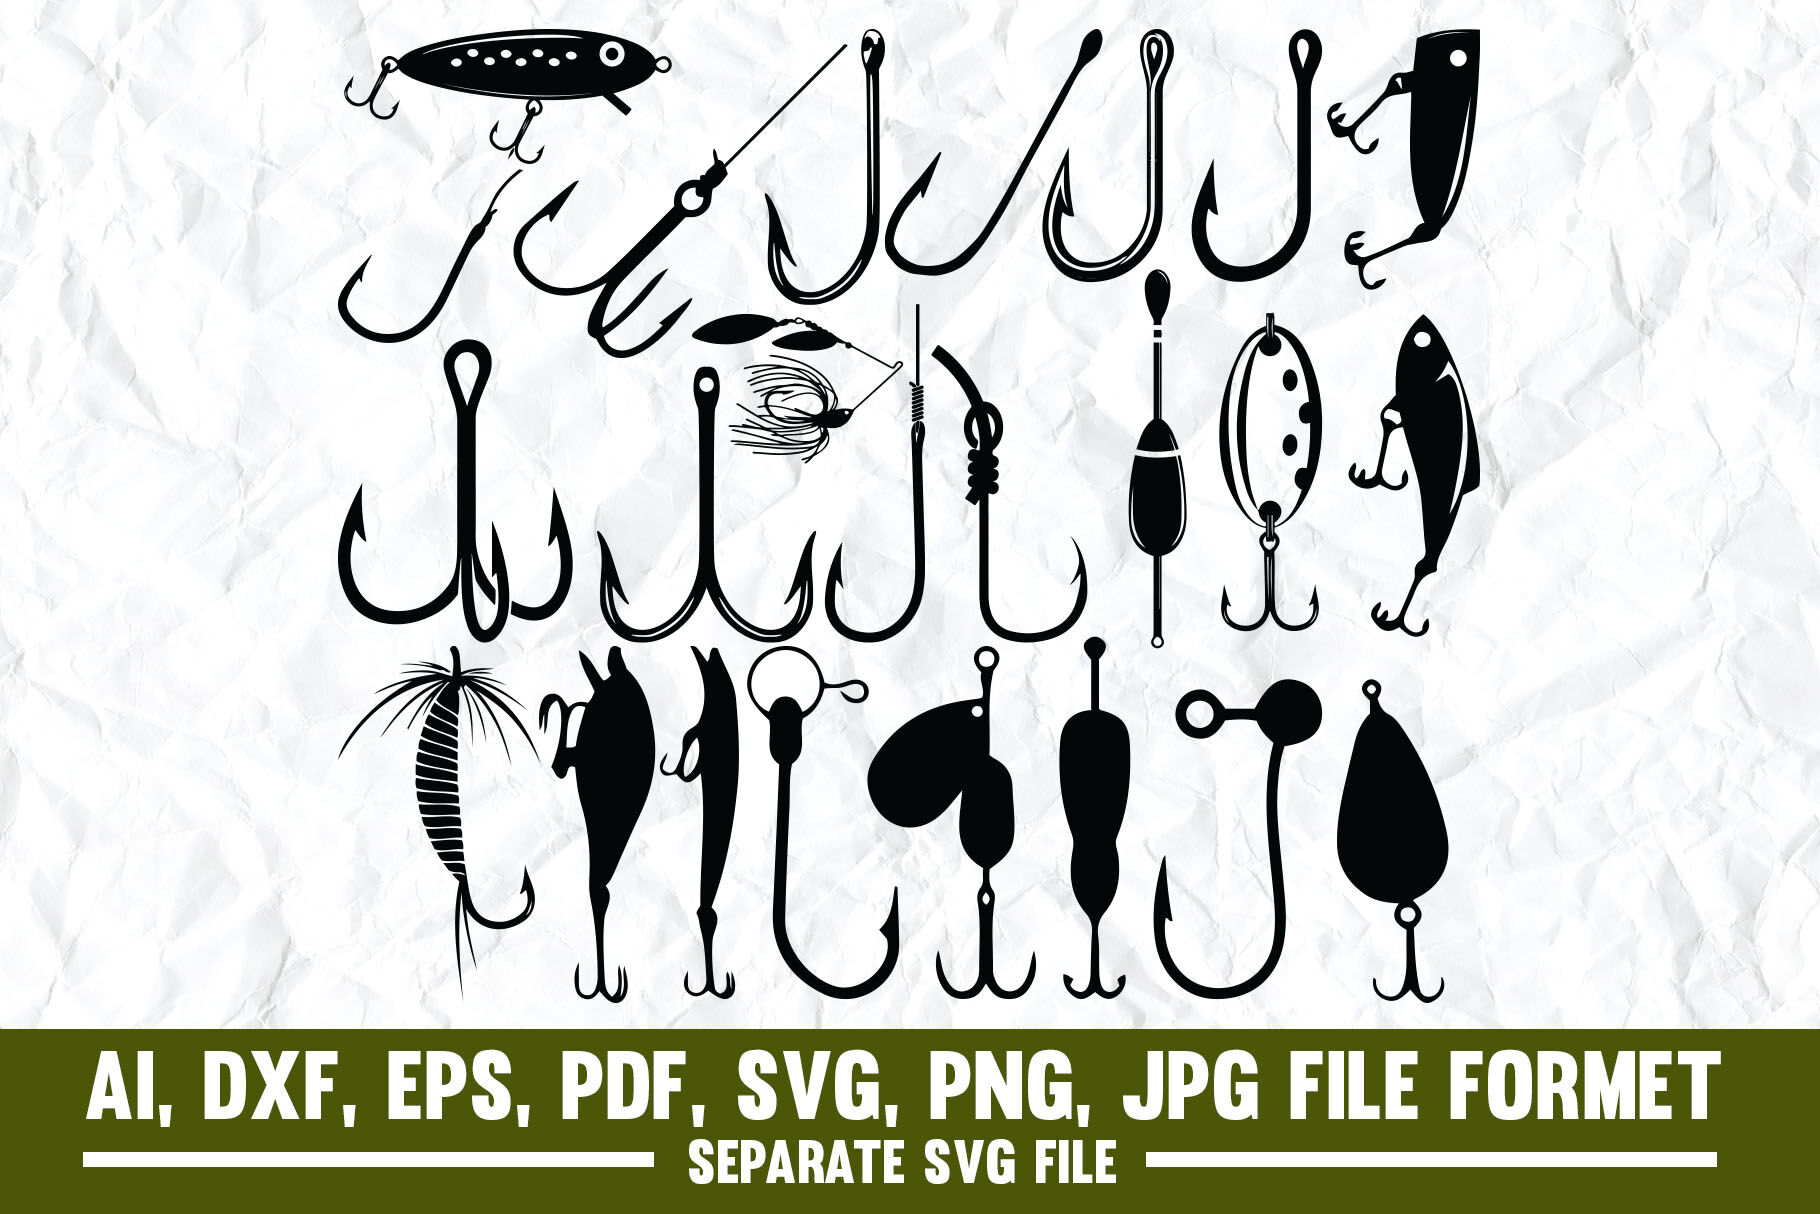 Page 8 - Buy Fishing Hooks Products Online at Best Prices in Kuwait